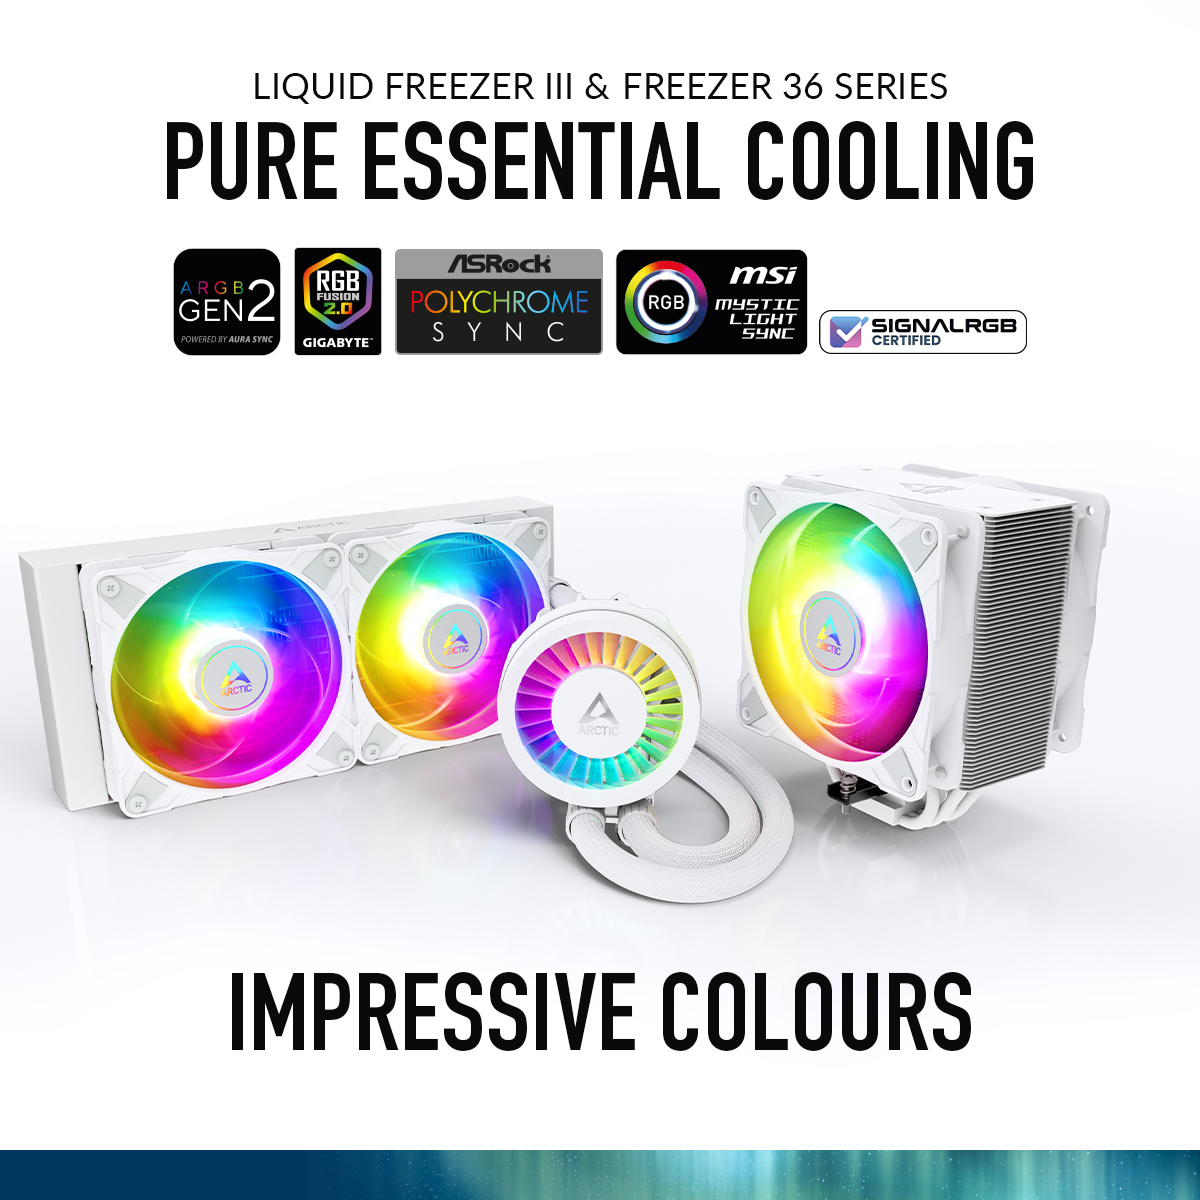 🌈Dive into vibrant visuals with Liquid Freezer III & Freezer 36! Elevate gaming with customizable A-RGB lighting, matching your style. Experience innovation now! ❄️🌈✨ #ARCTIC #ARCTICool #LiquidFreezerIII #LFIII #Freezer36 #F36 #ARGB #GamingTech #PCgaming #cooling #tech #gaming